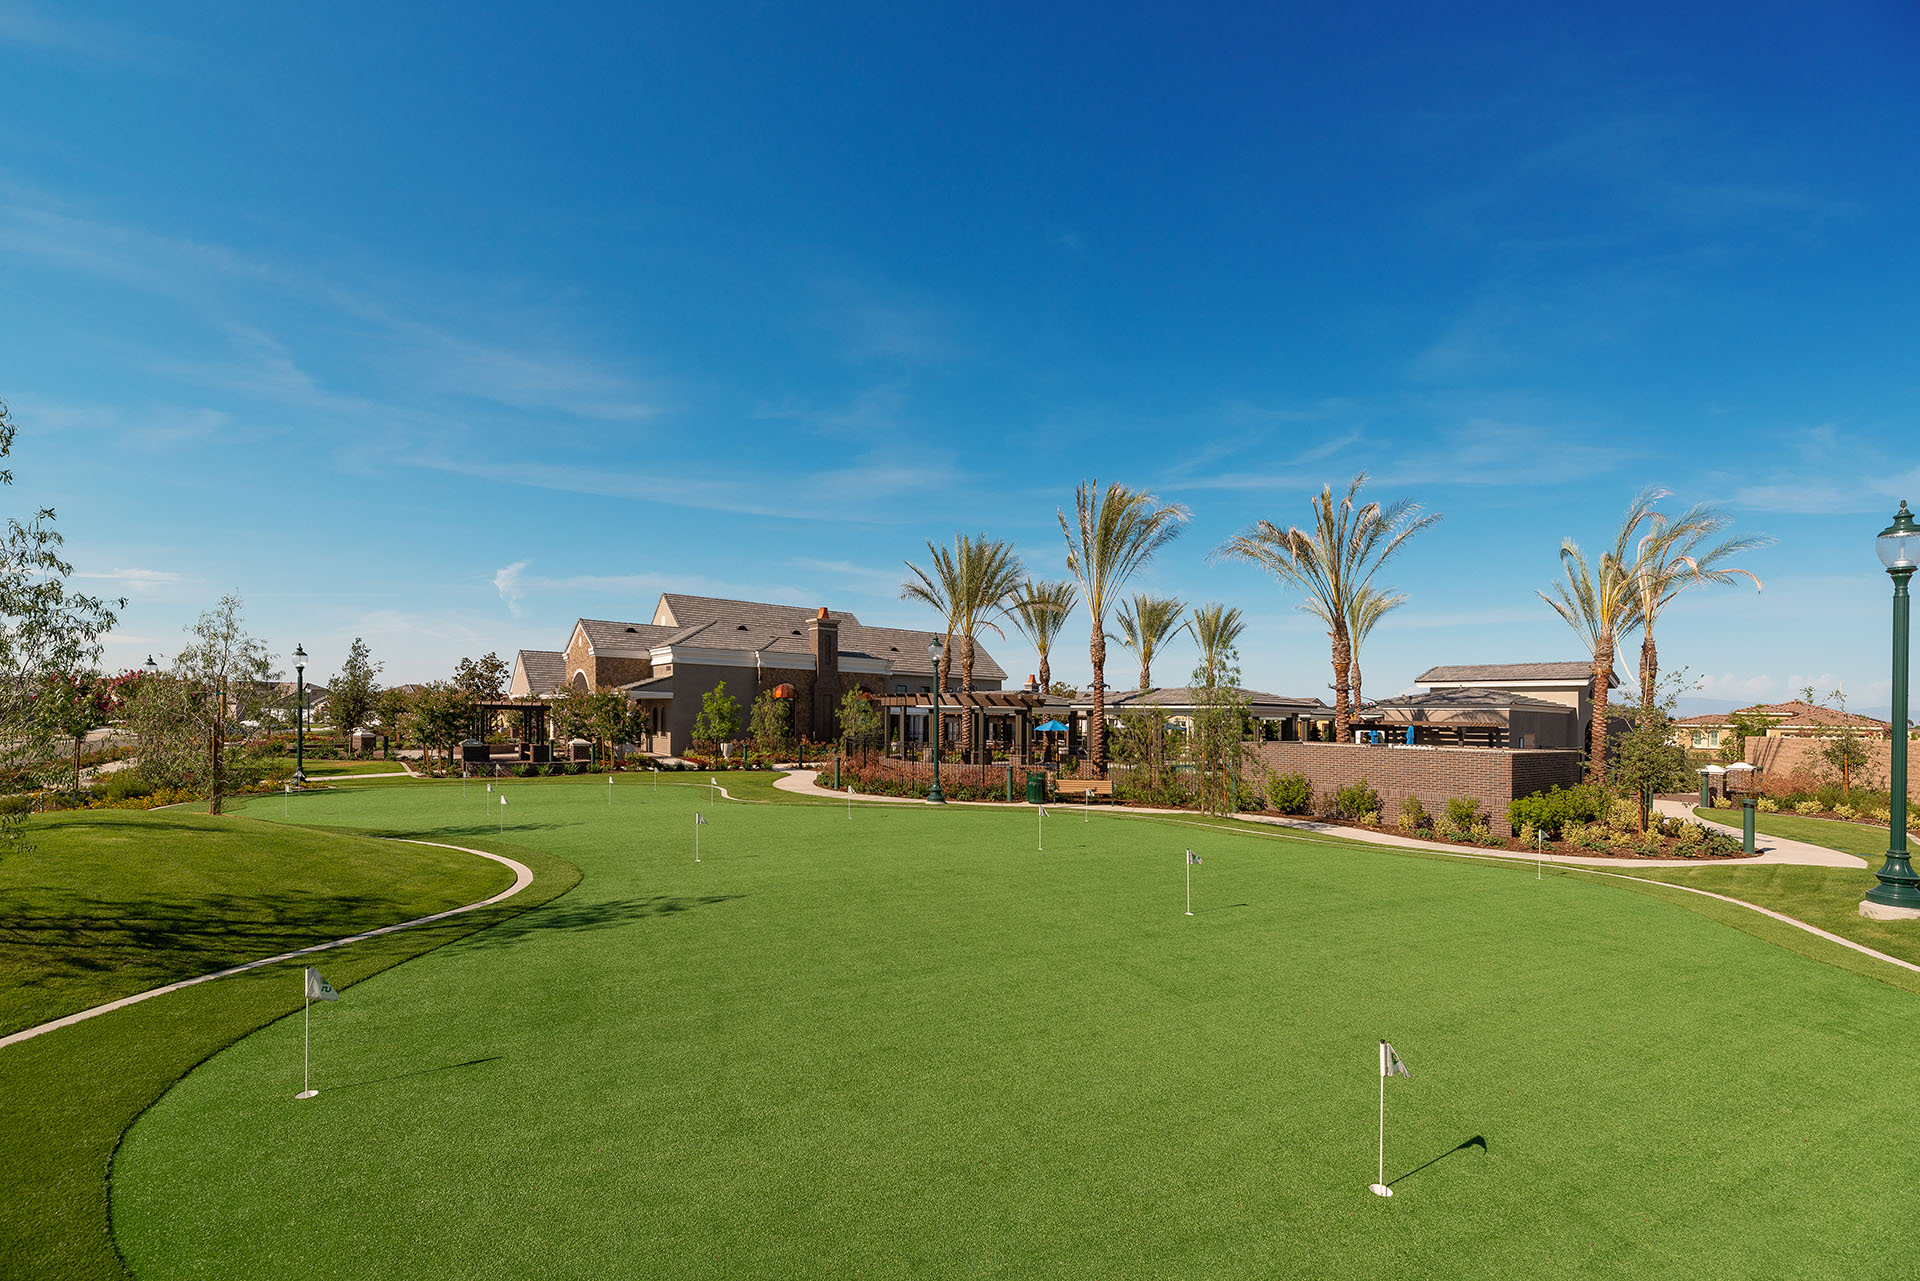 A well-maintained putting green in a sunny outdoor setting with several palm trees, a clear blue sky, and a large building with a terrace in the background.